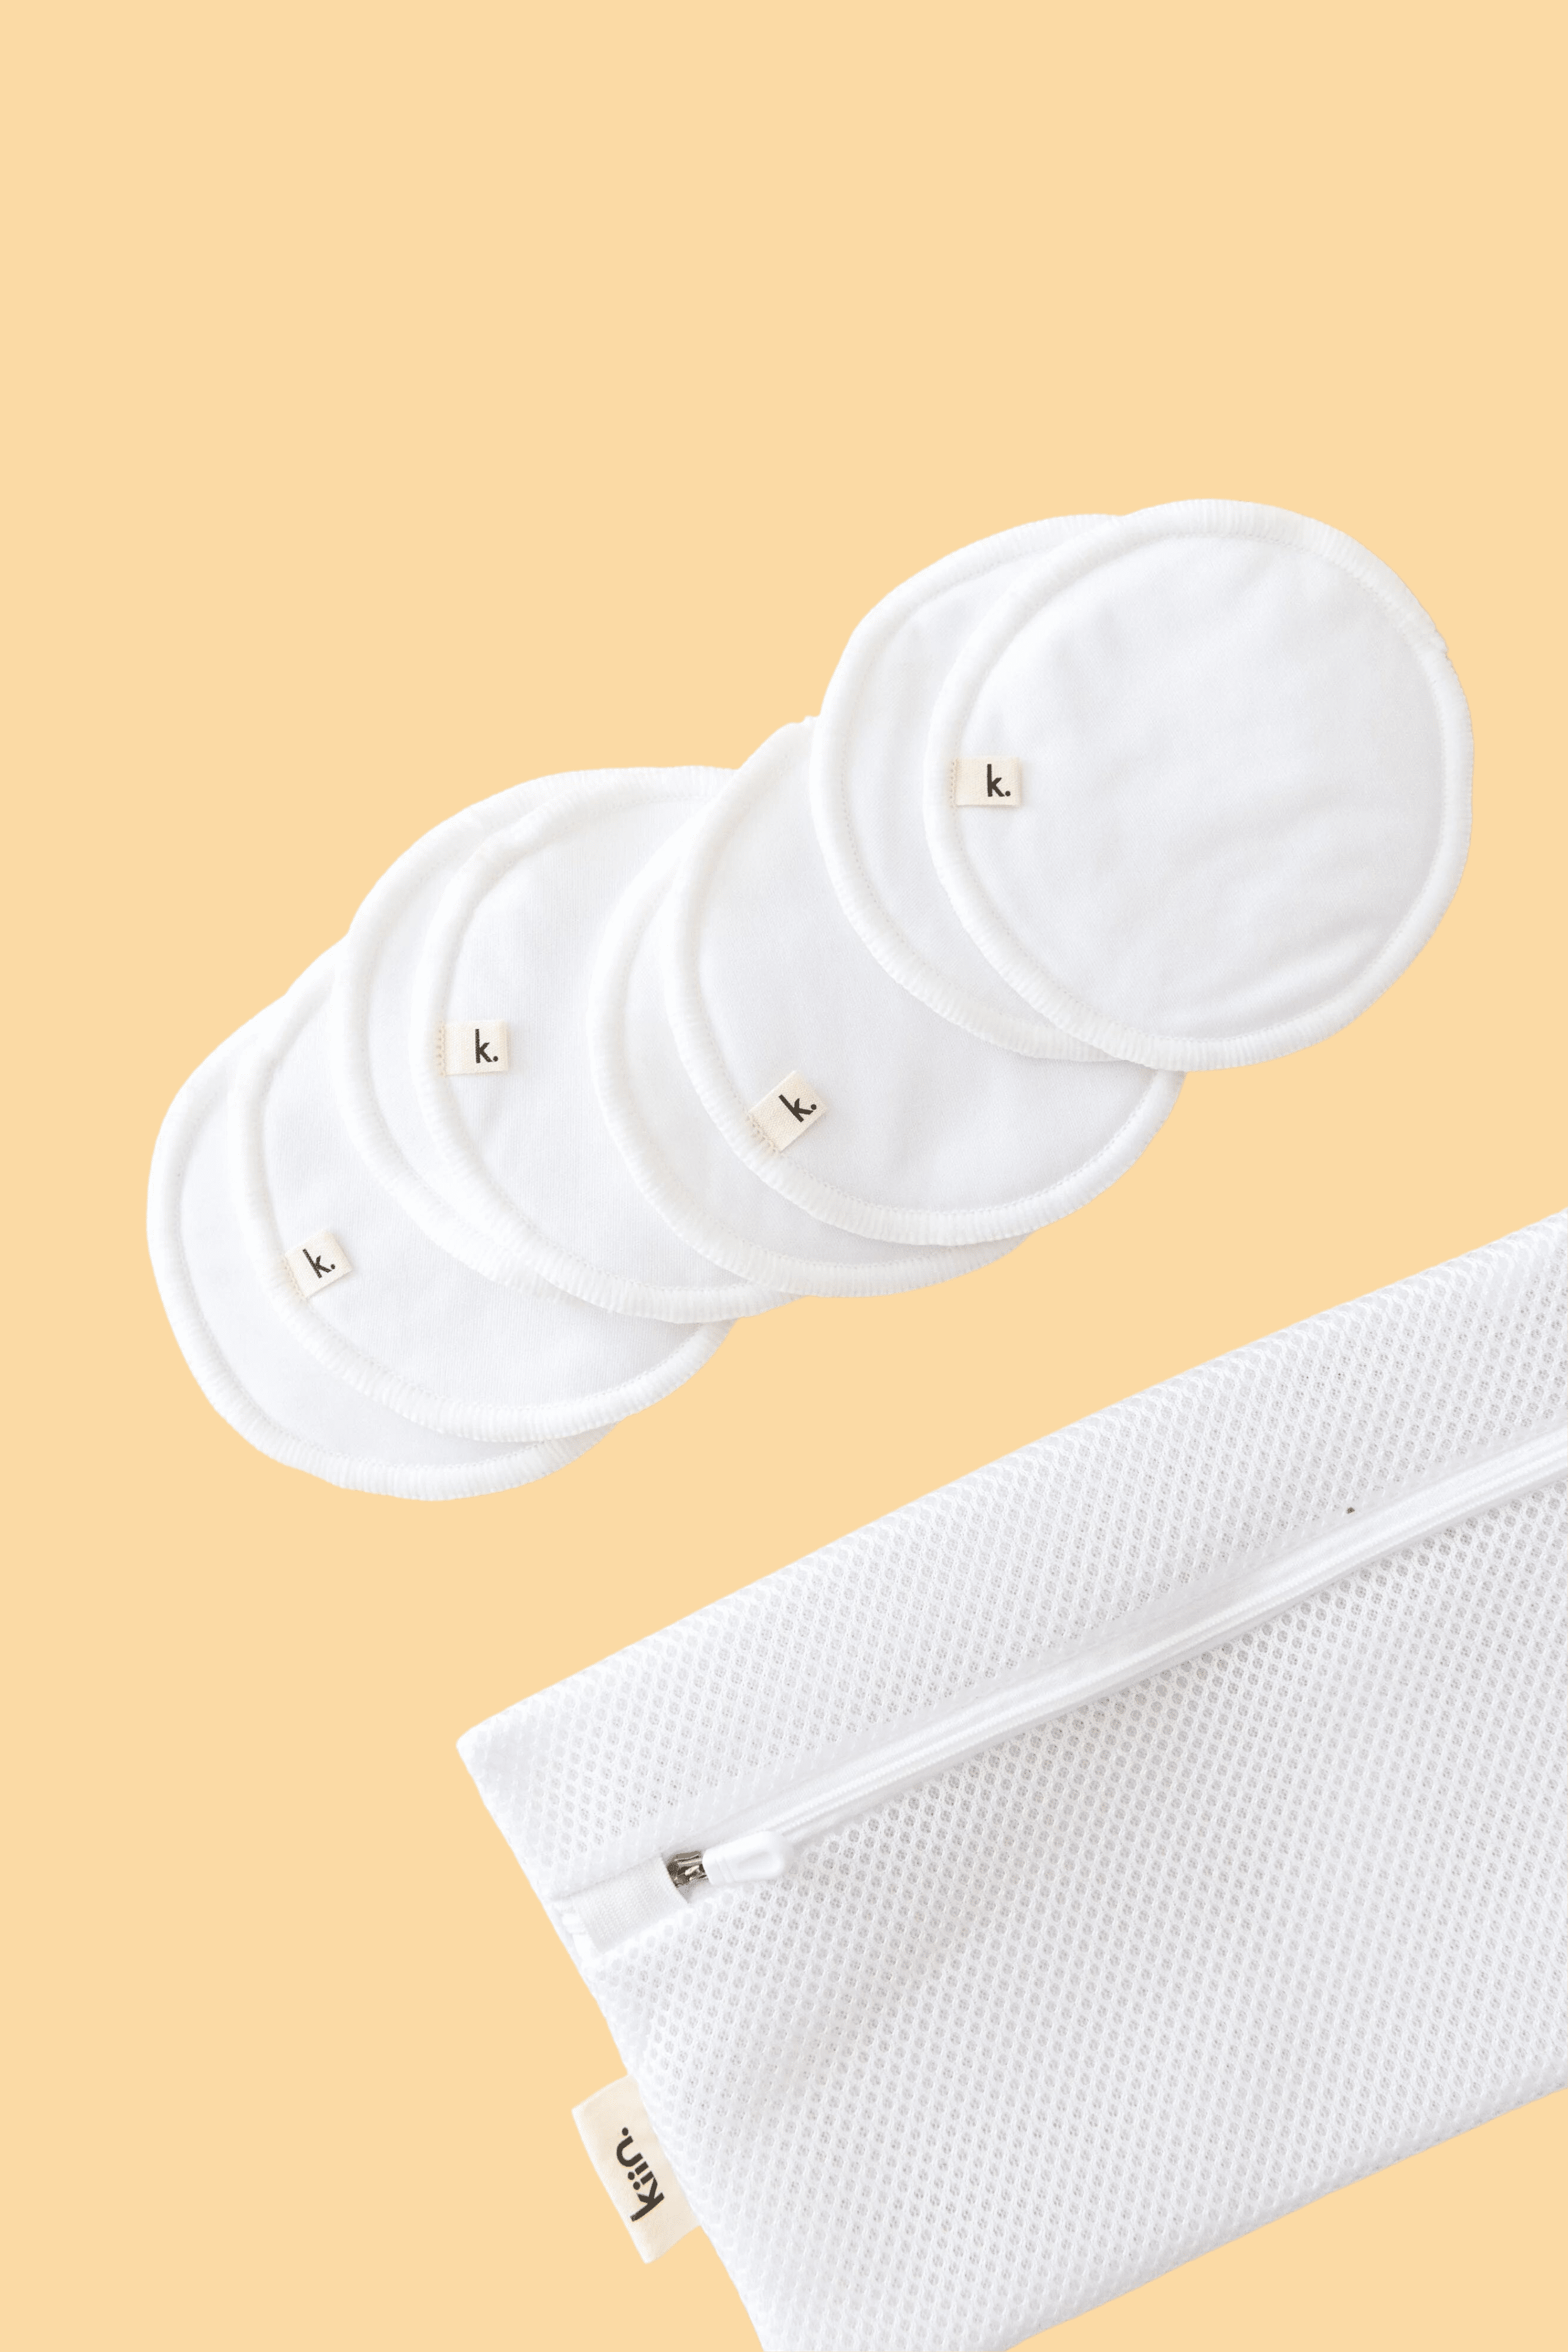 Kiinde Expressions Breast Pads Starter Pack | Disposable Nursing Pads and  Reusable Nursing Pads with Heating Pads for Postpartum Nipple Relief and